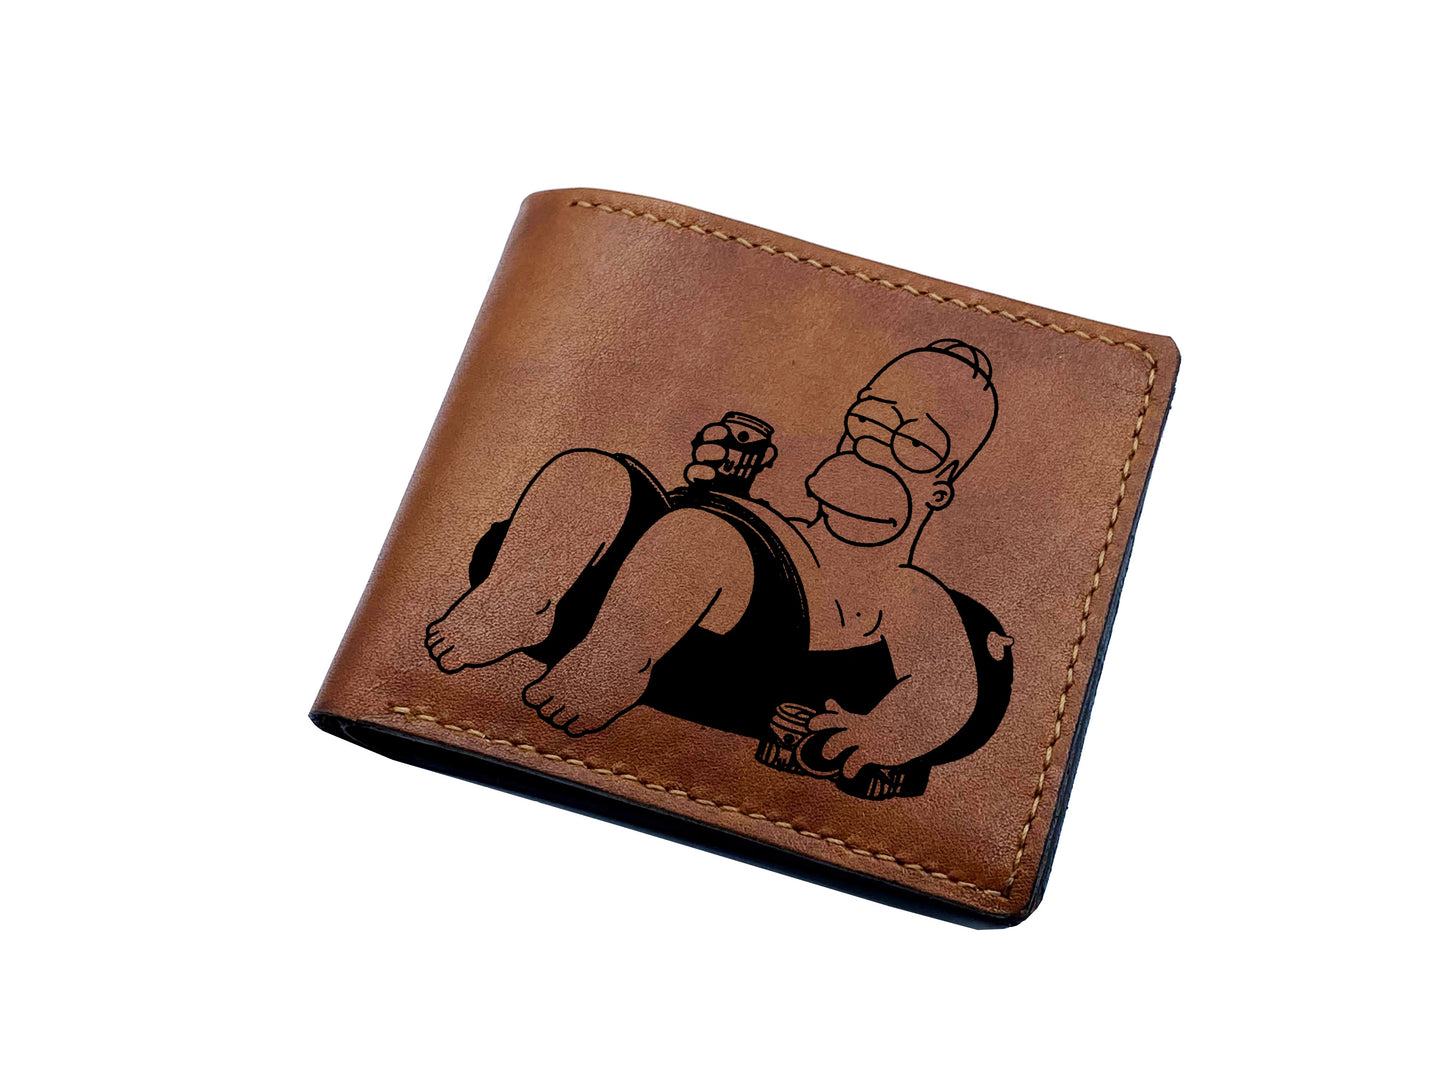 Mayan Corner - Personalized leather handmade wallet, The Simpsons movie engraving wallet, Homer Simpson art, leather art wallet for him, gift for dad, husband